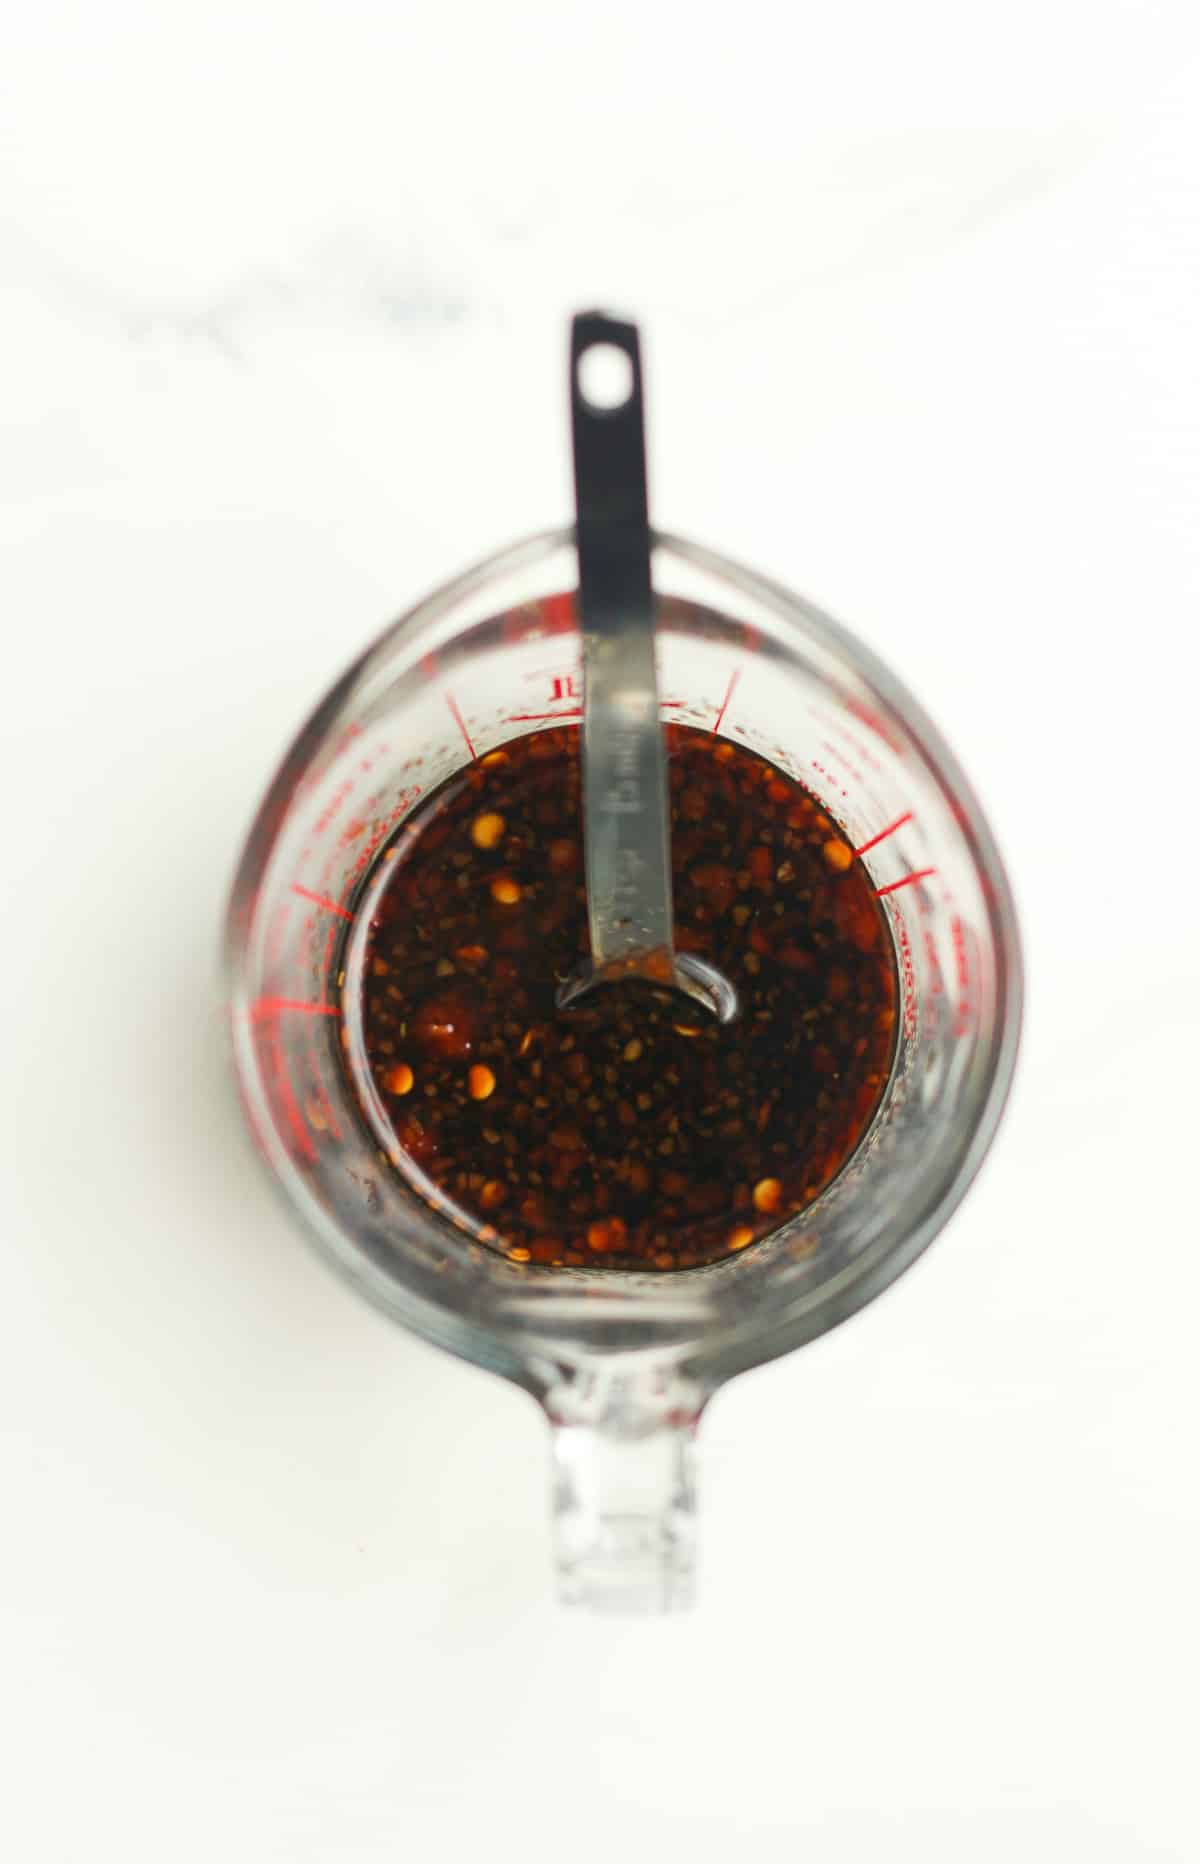 A measuring cup of the sauce.